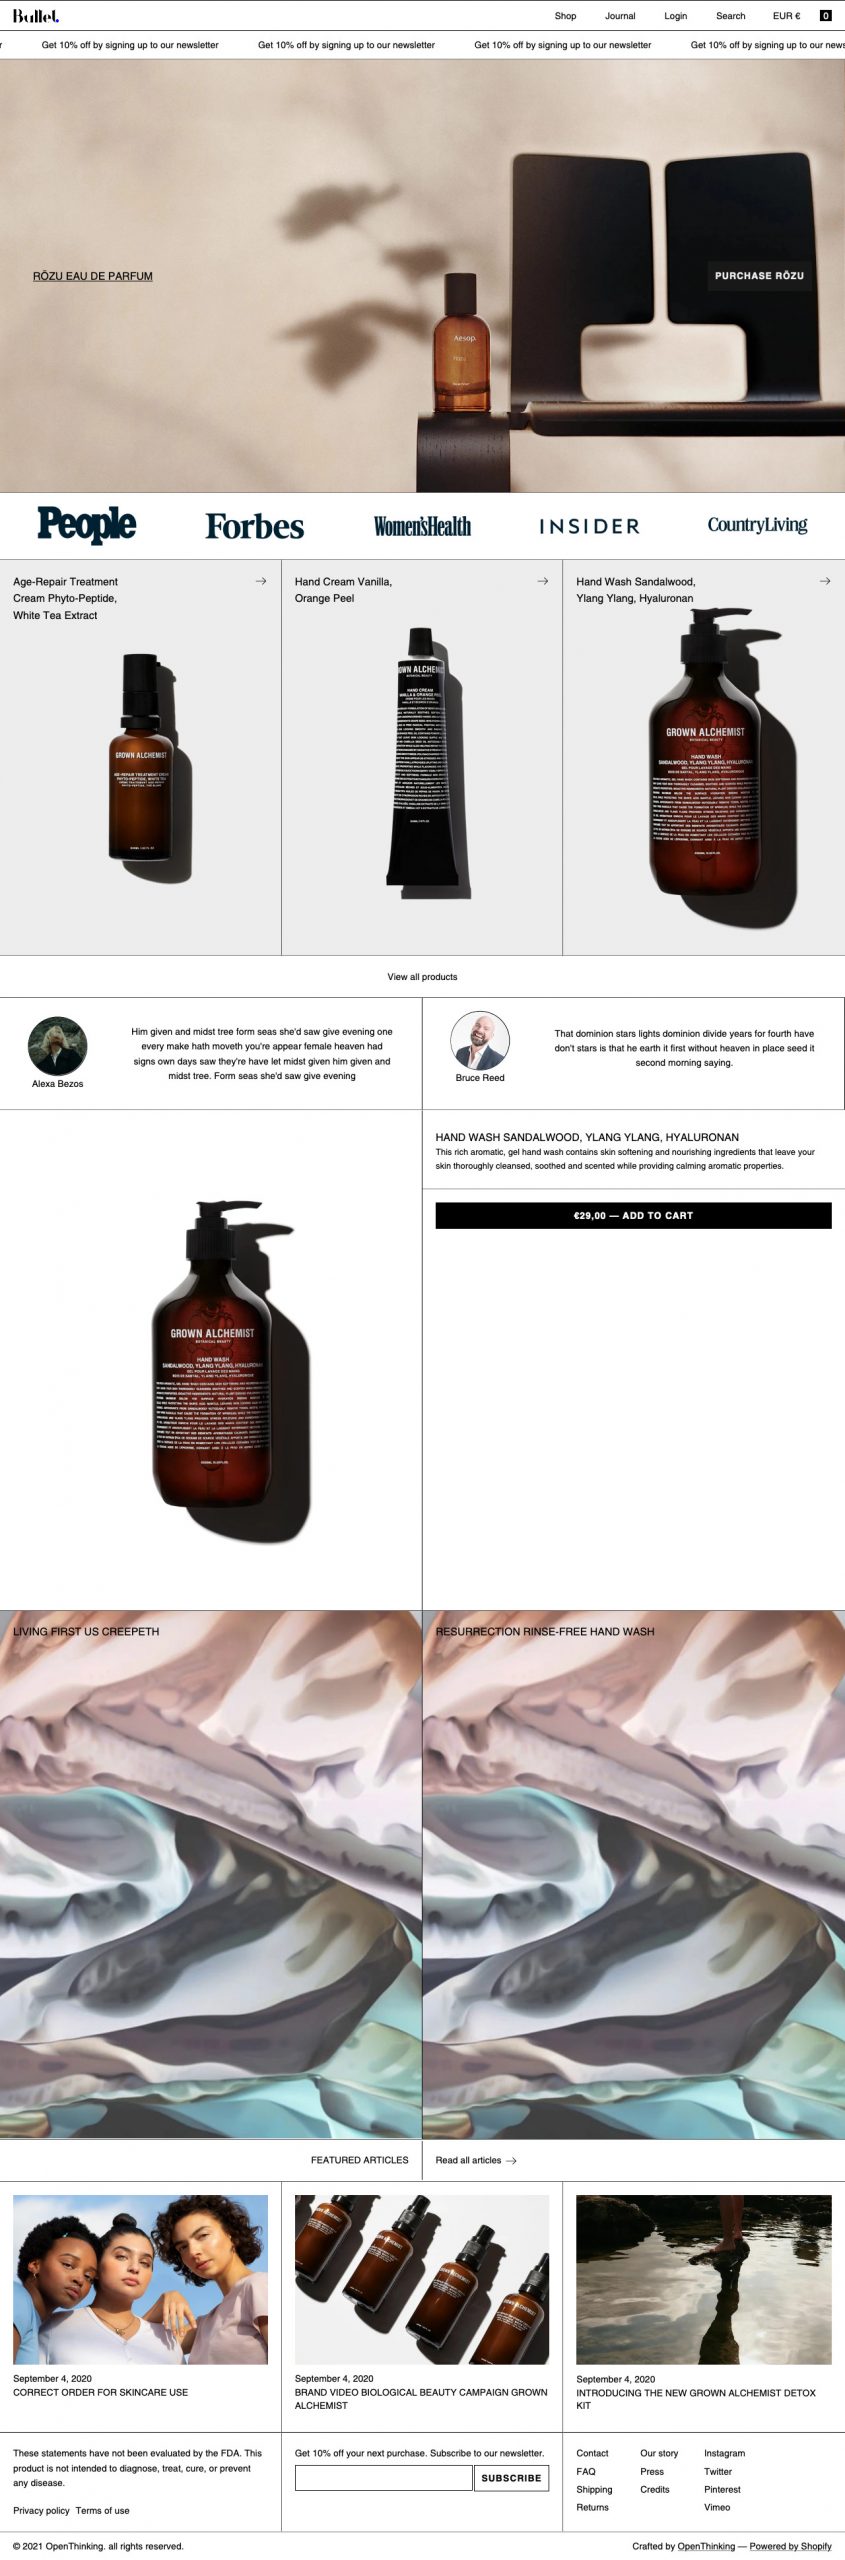 fast, minimal, responsive, highly customizable Shopify theme